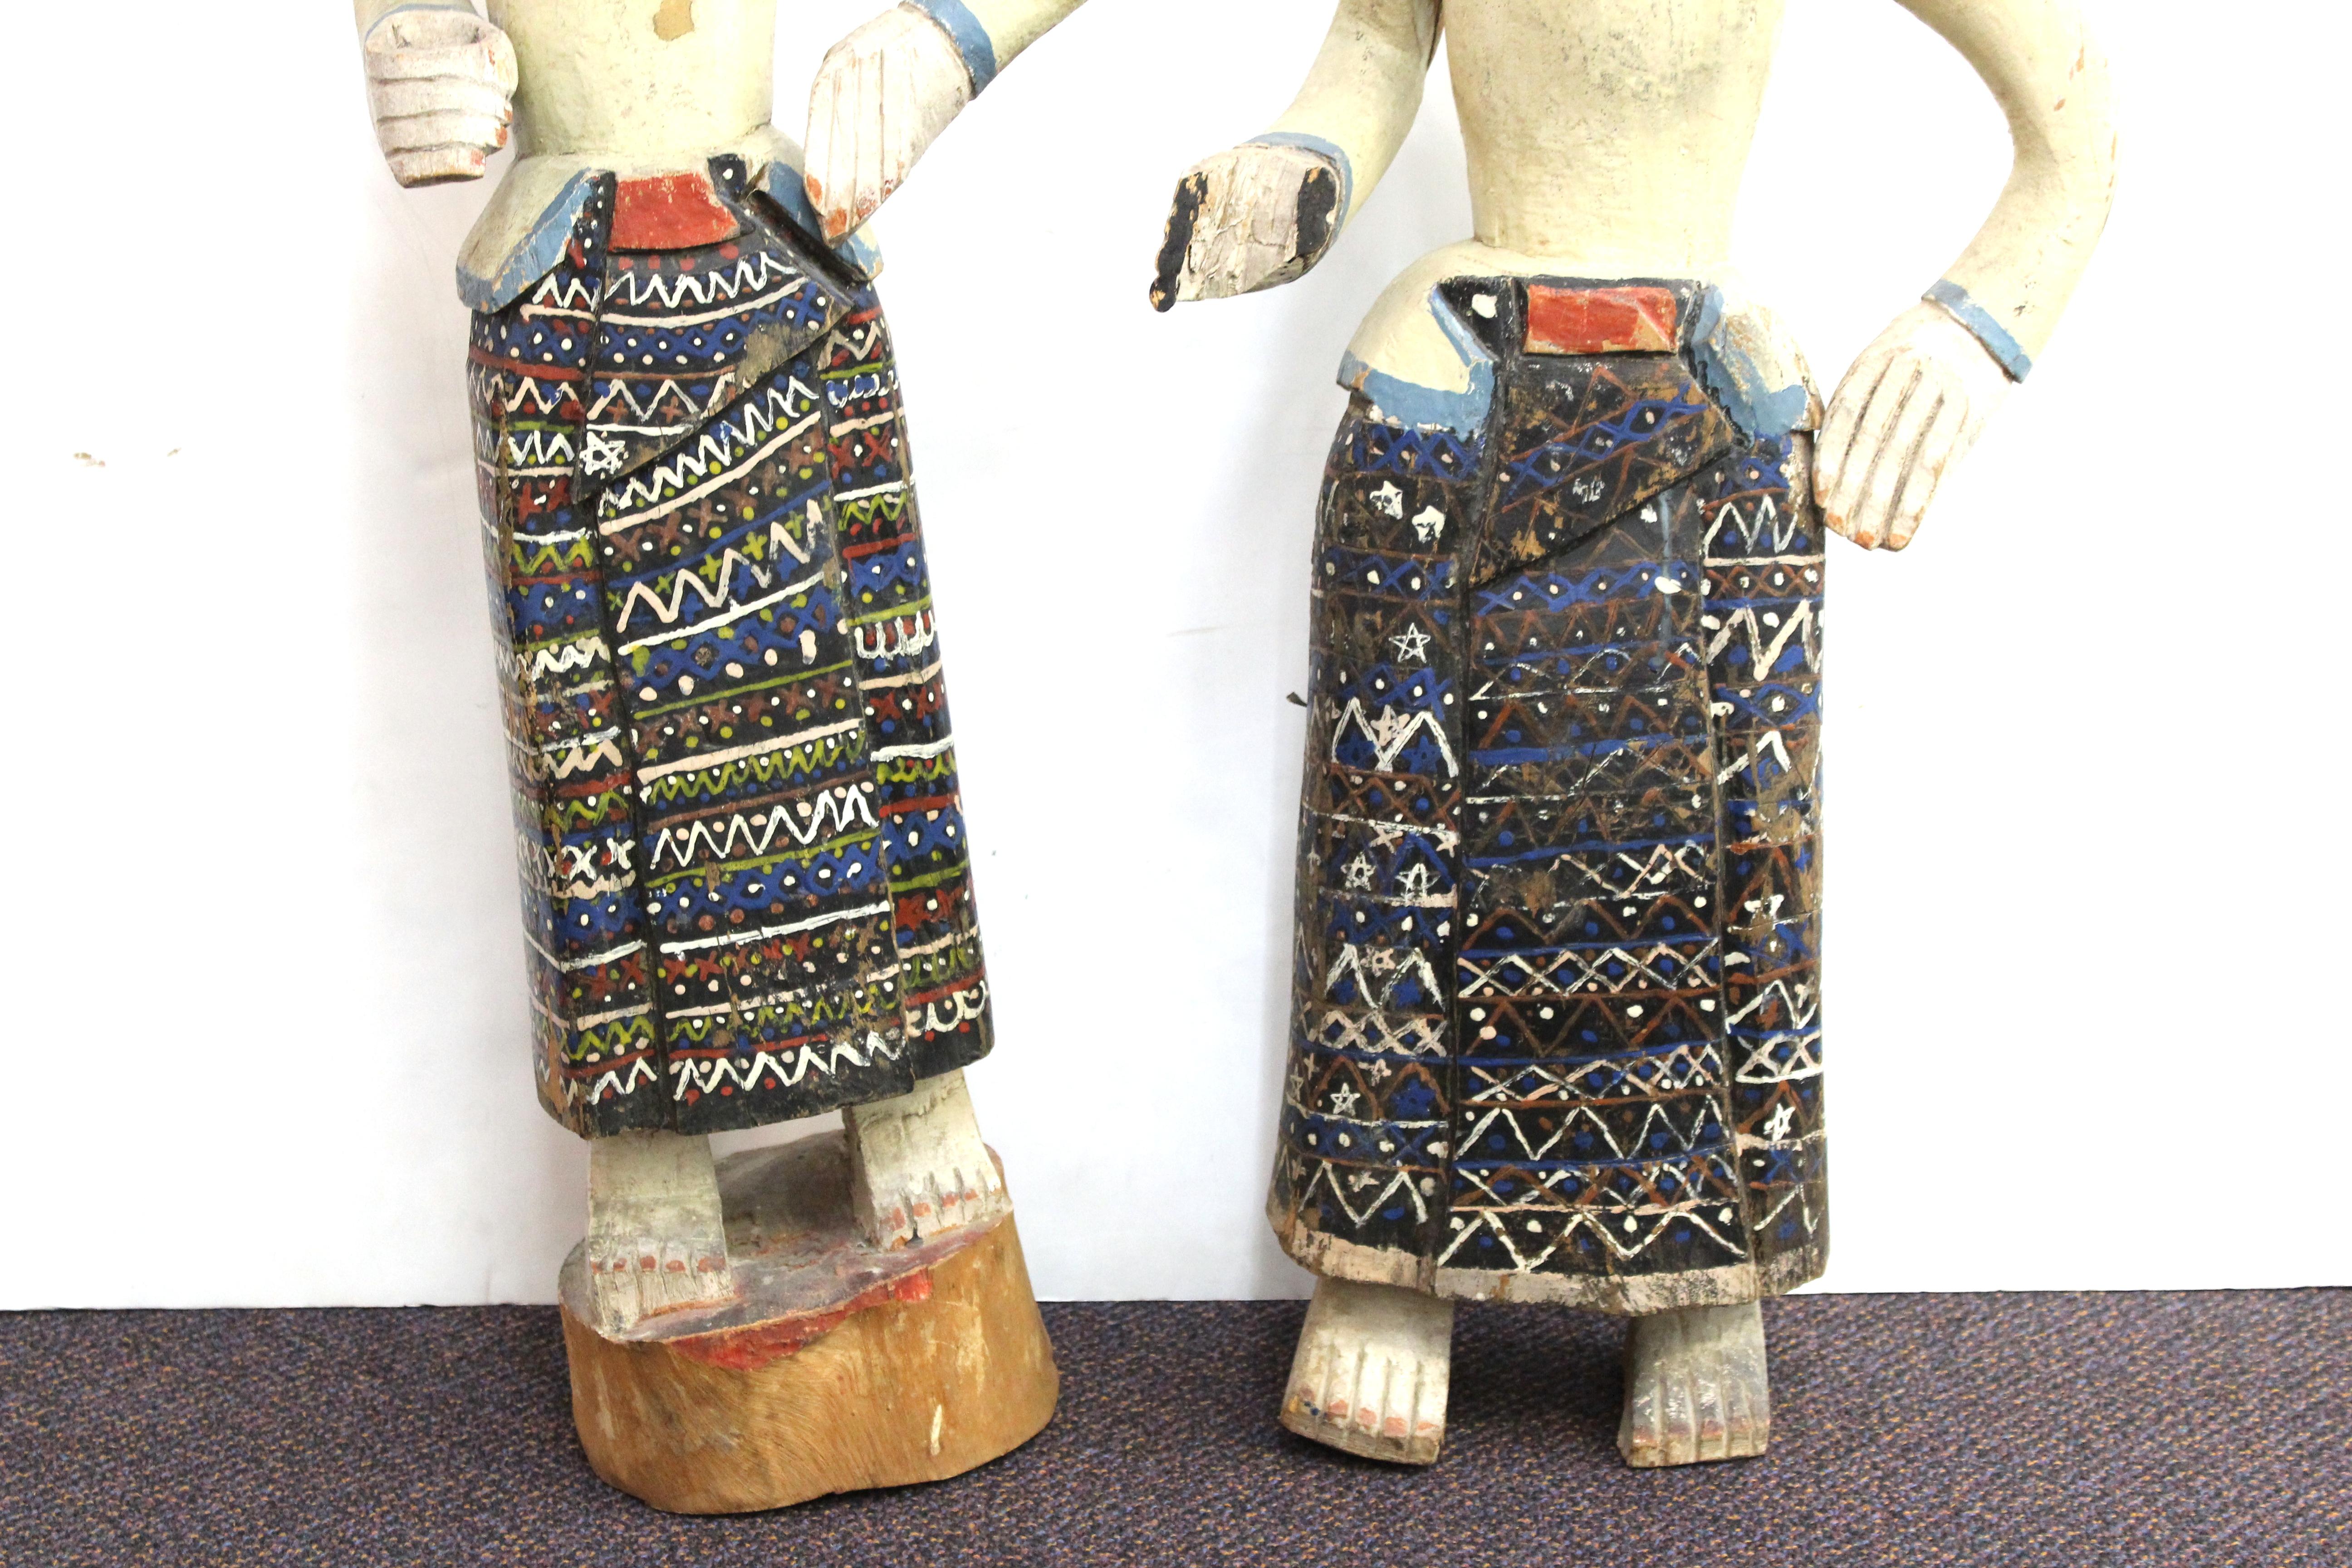 South-East Asian pair of carved and hand-painted wood figures of standing men with articulated arms, in colorful sarongs and traditional tribal headgear, one standing on a block, the other one standing flat. Both have some paint wear, the shorter